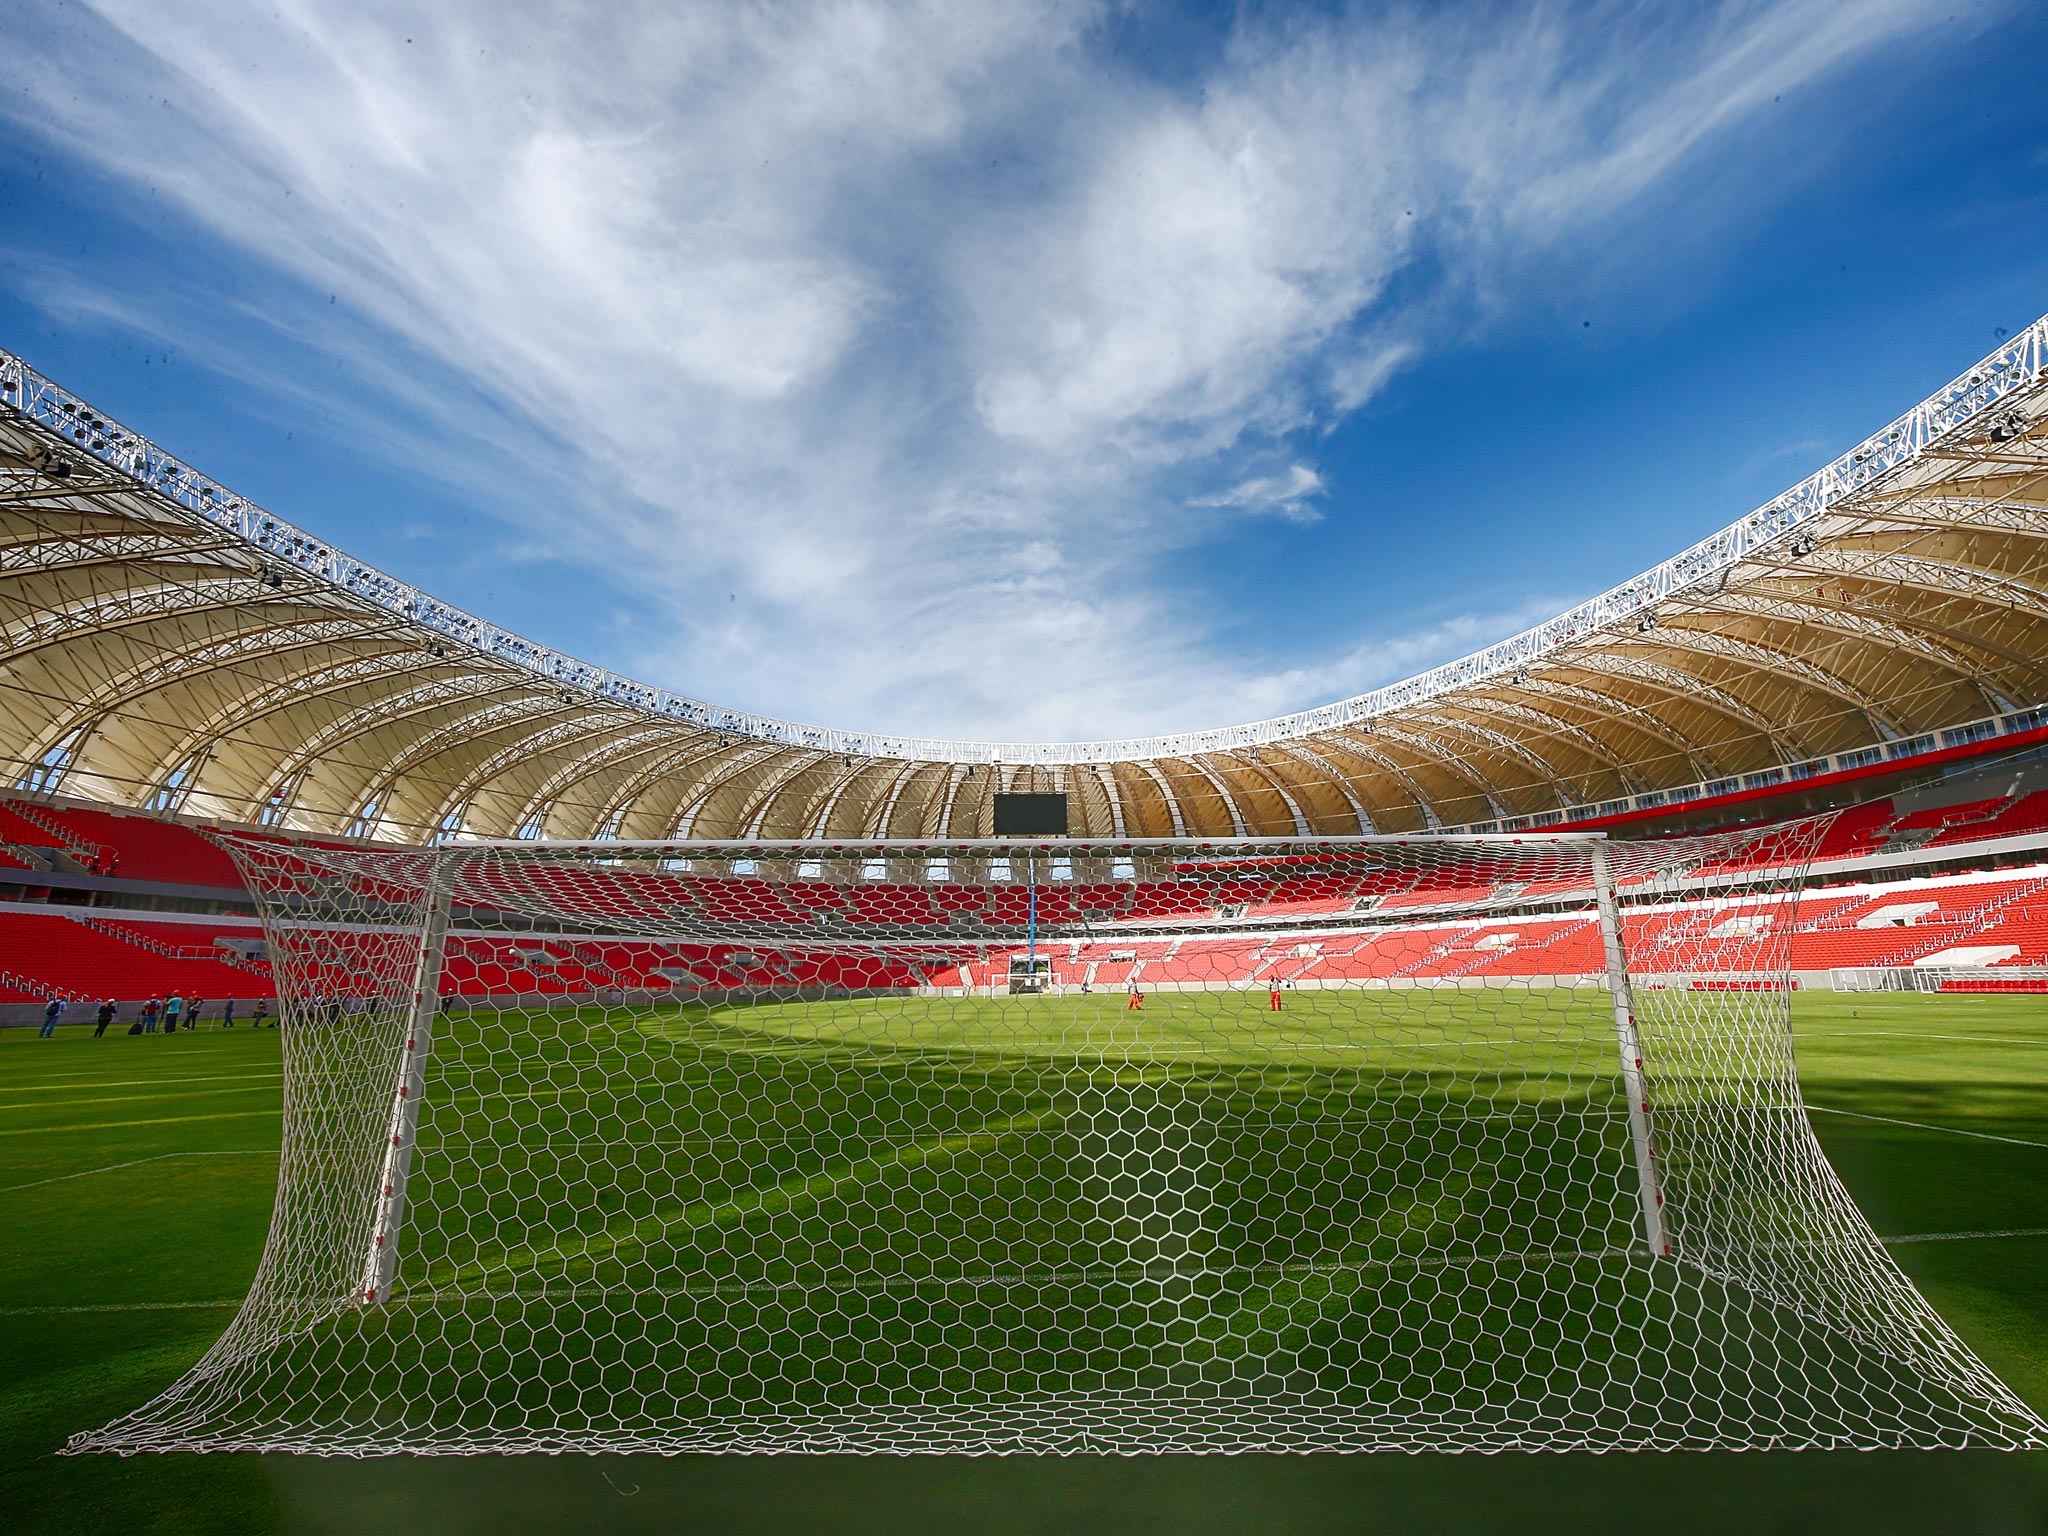 The Estadio Beira-Rio could be forced to pull out of hosting matches in the 2014 World Cup